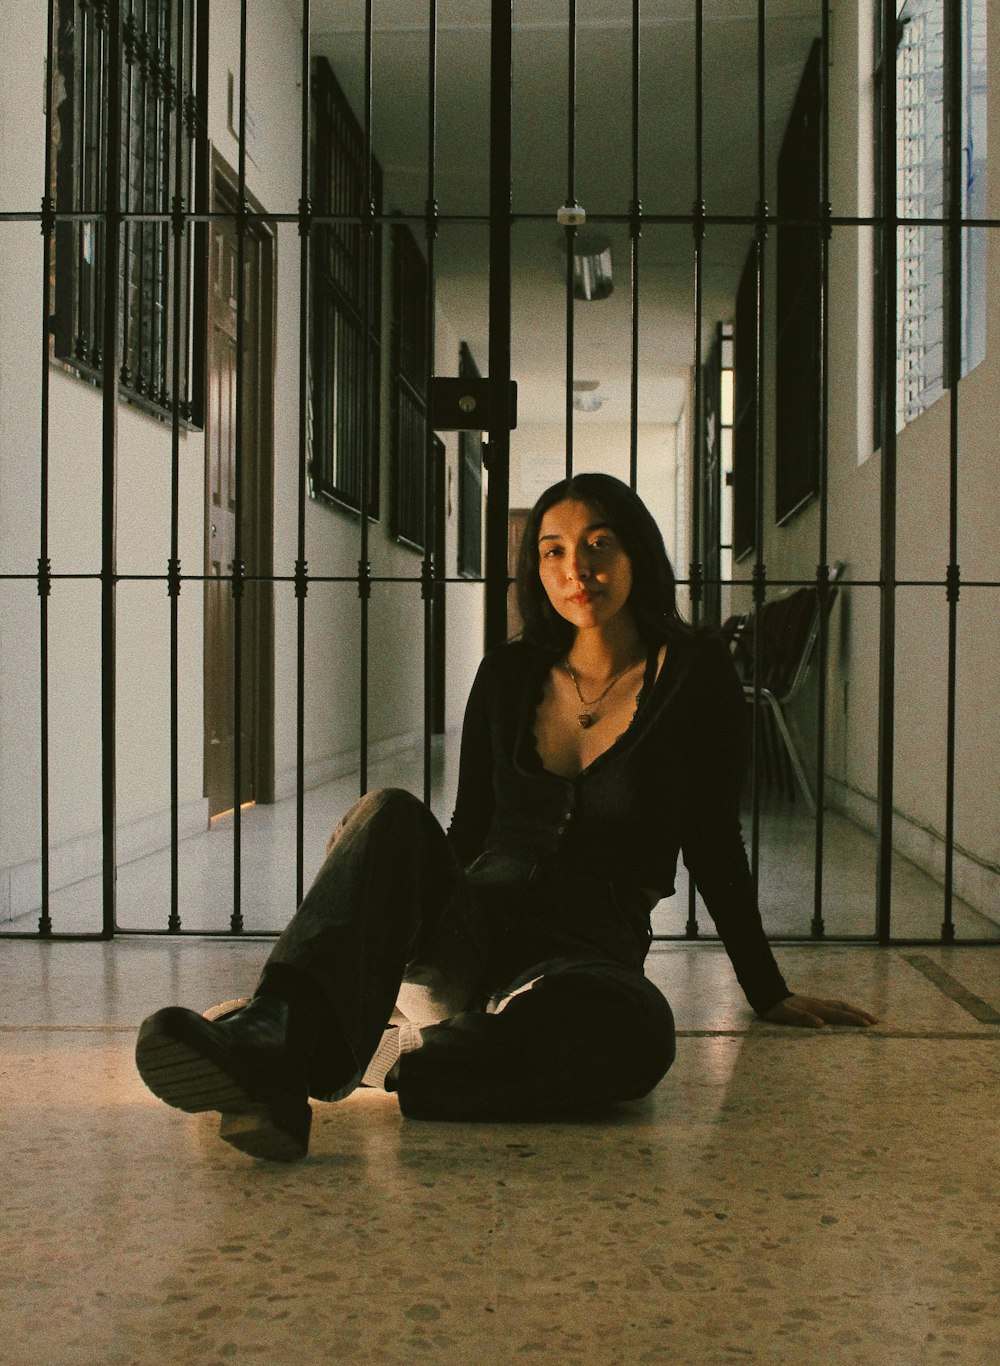 a woman sitting on the floor in a jail cell